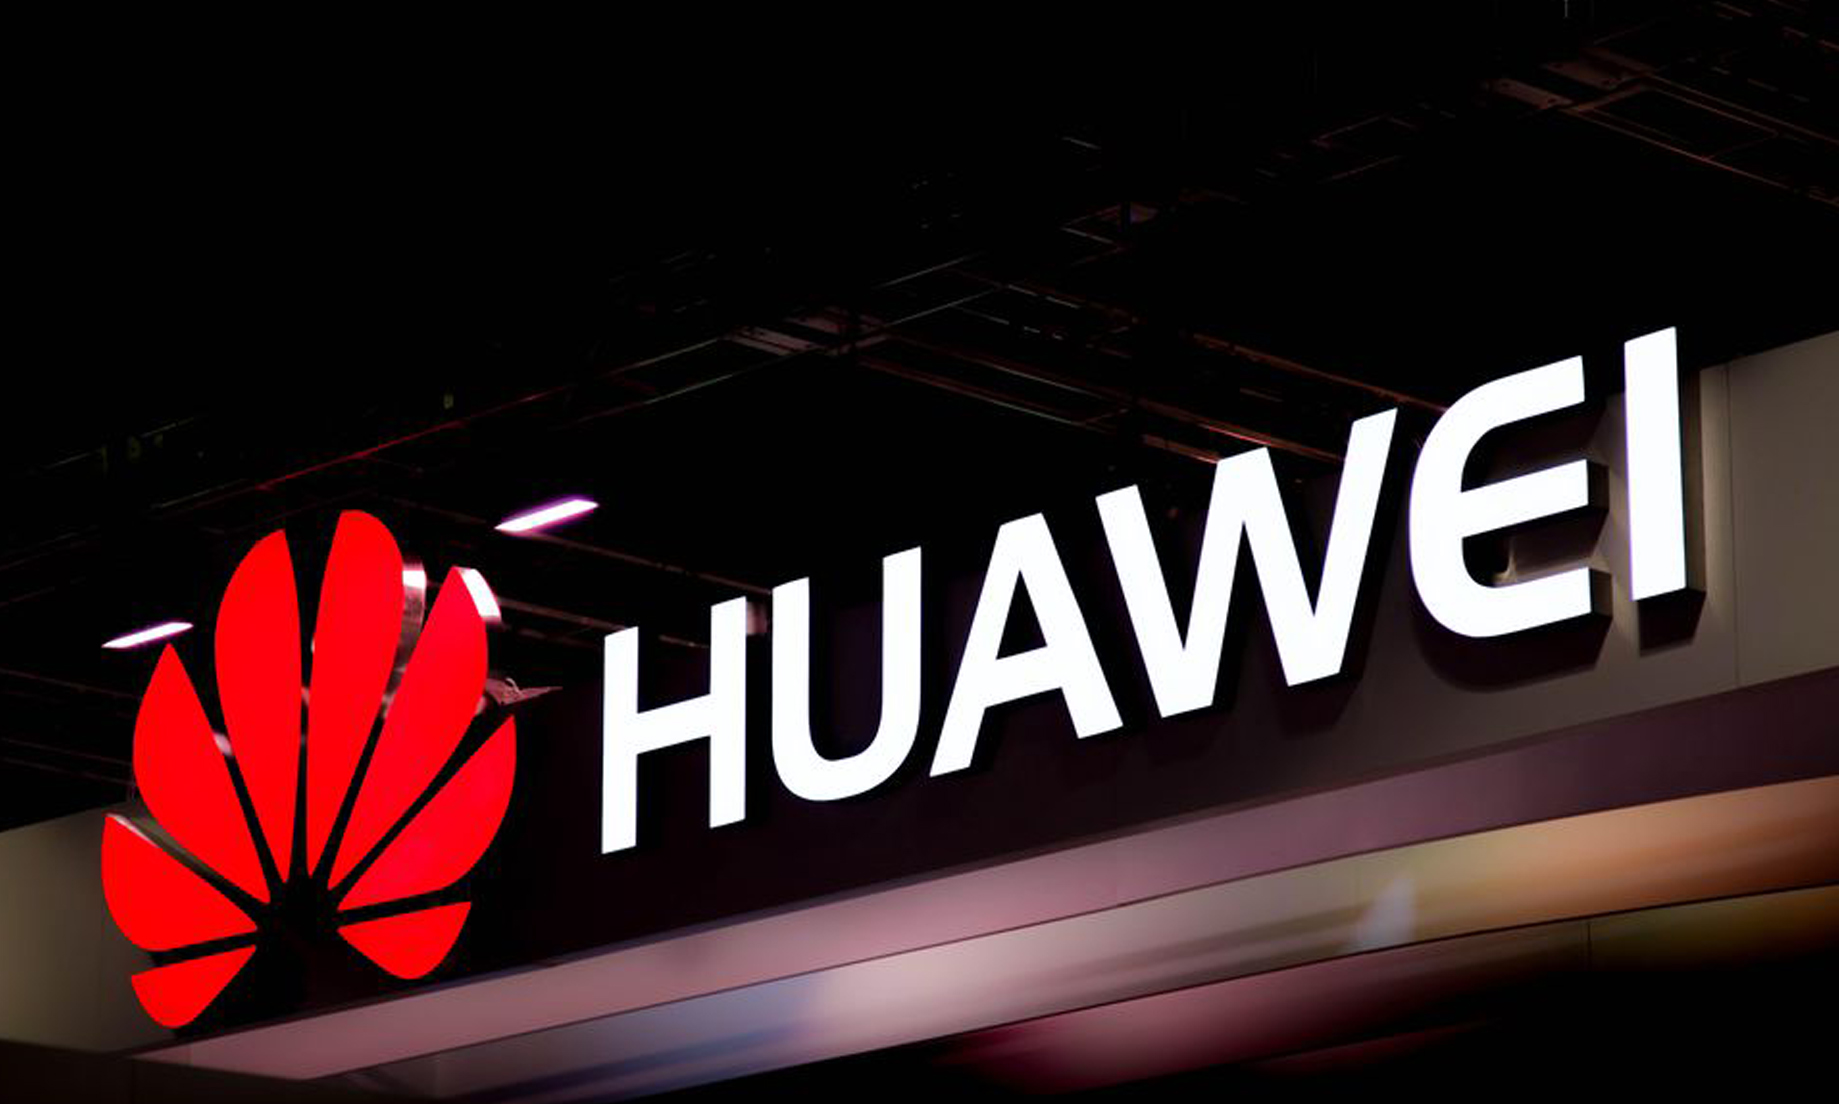 China’s Huawei files lawsuit against US over product ban